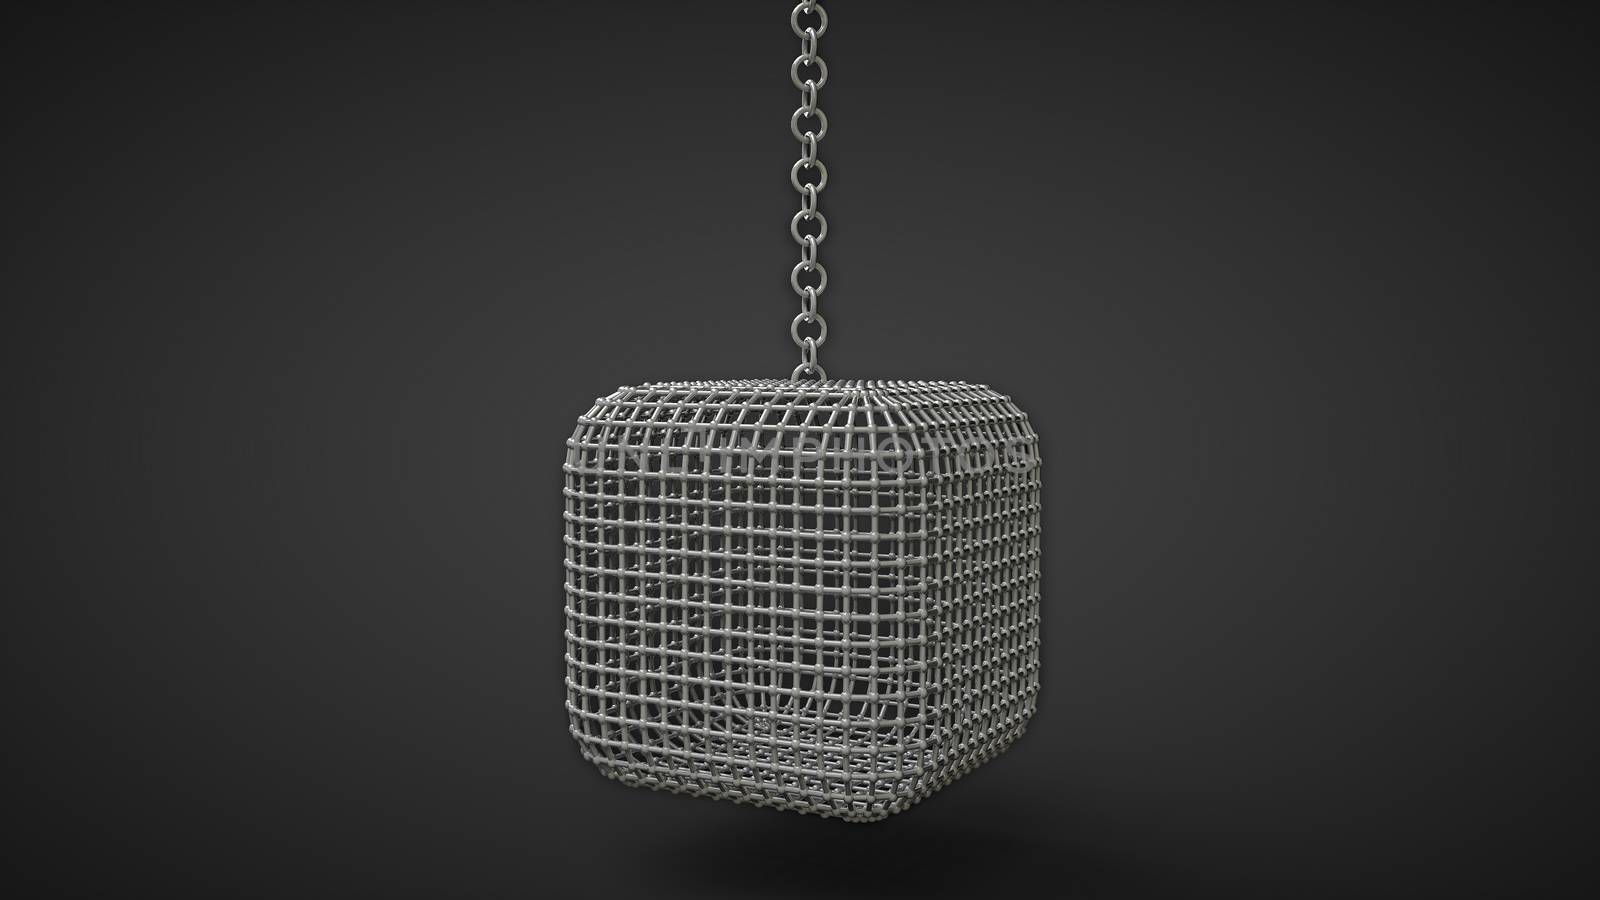 mew cage box shaped hanging on a chain isolated on black background